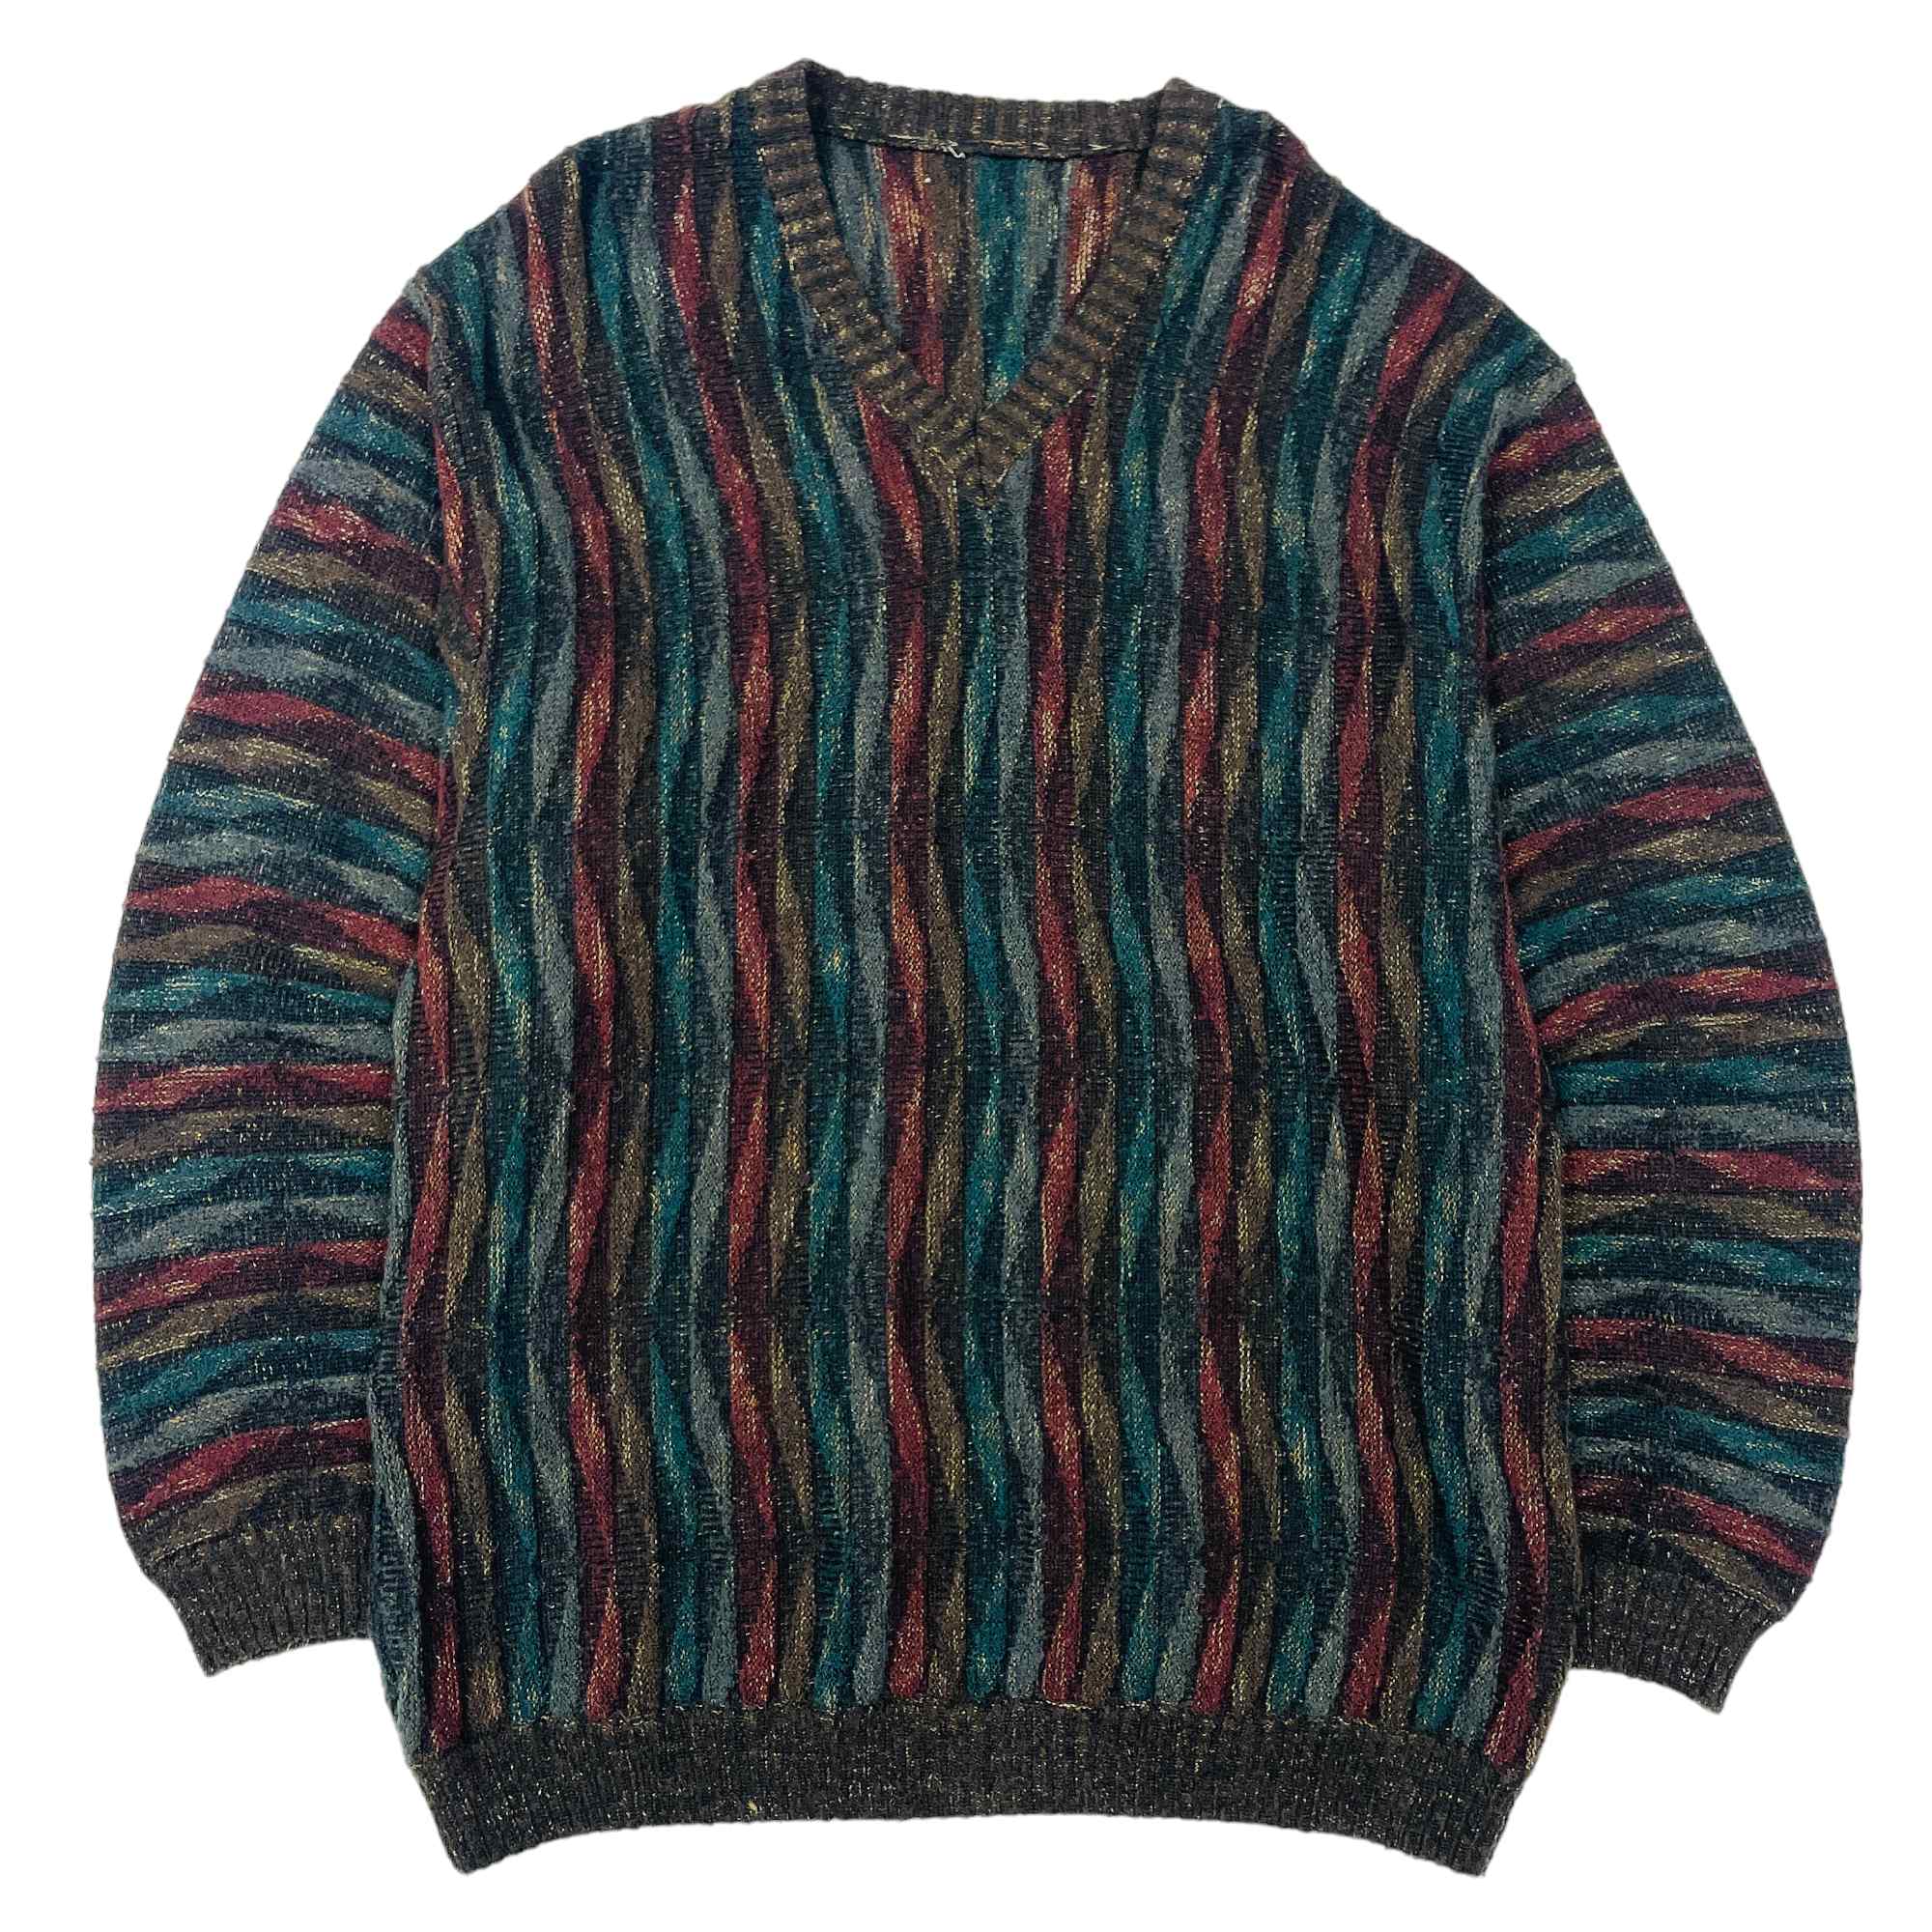 Knitted Jumper With Raised Pattern - Large